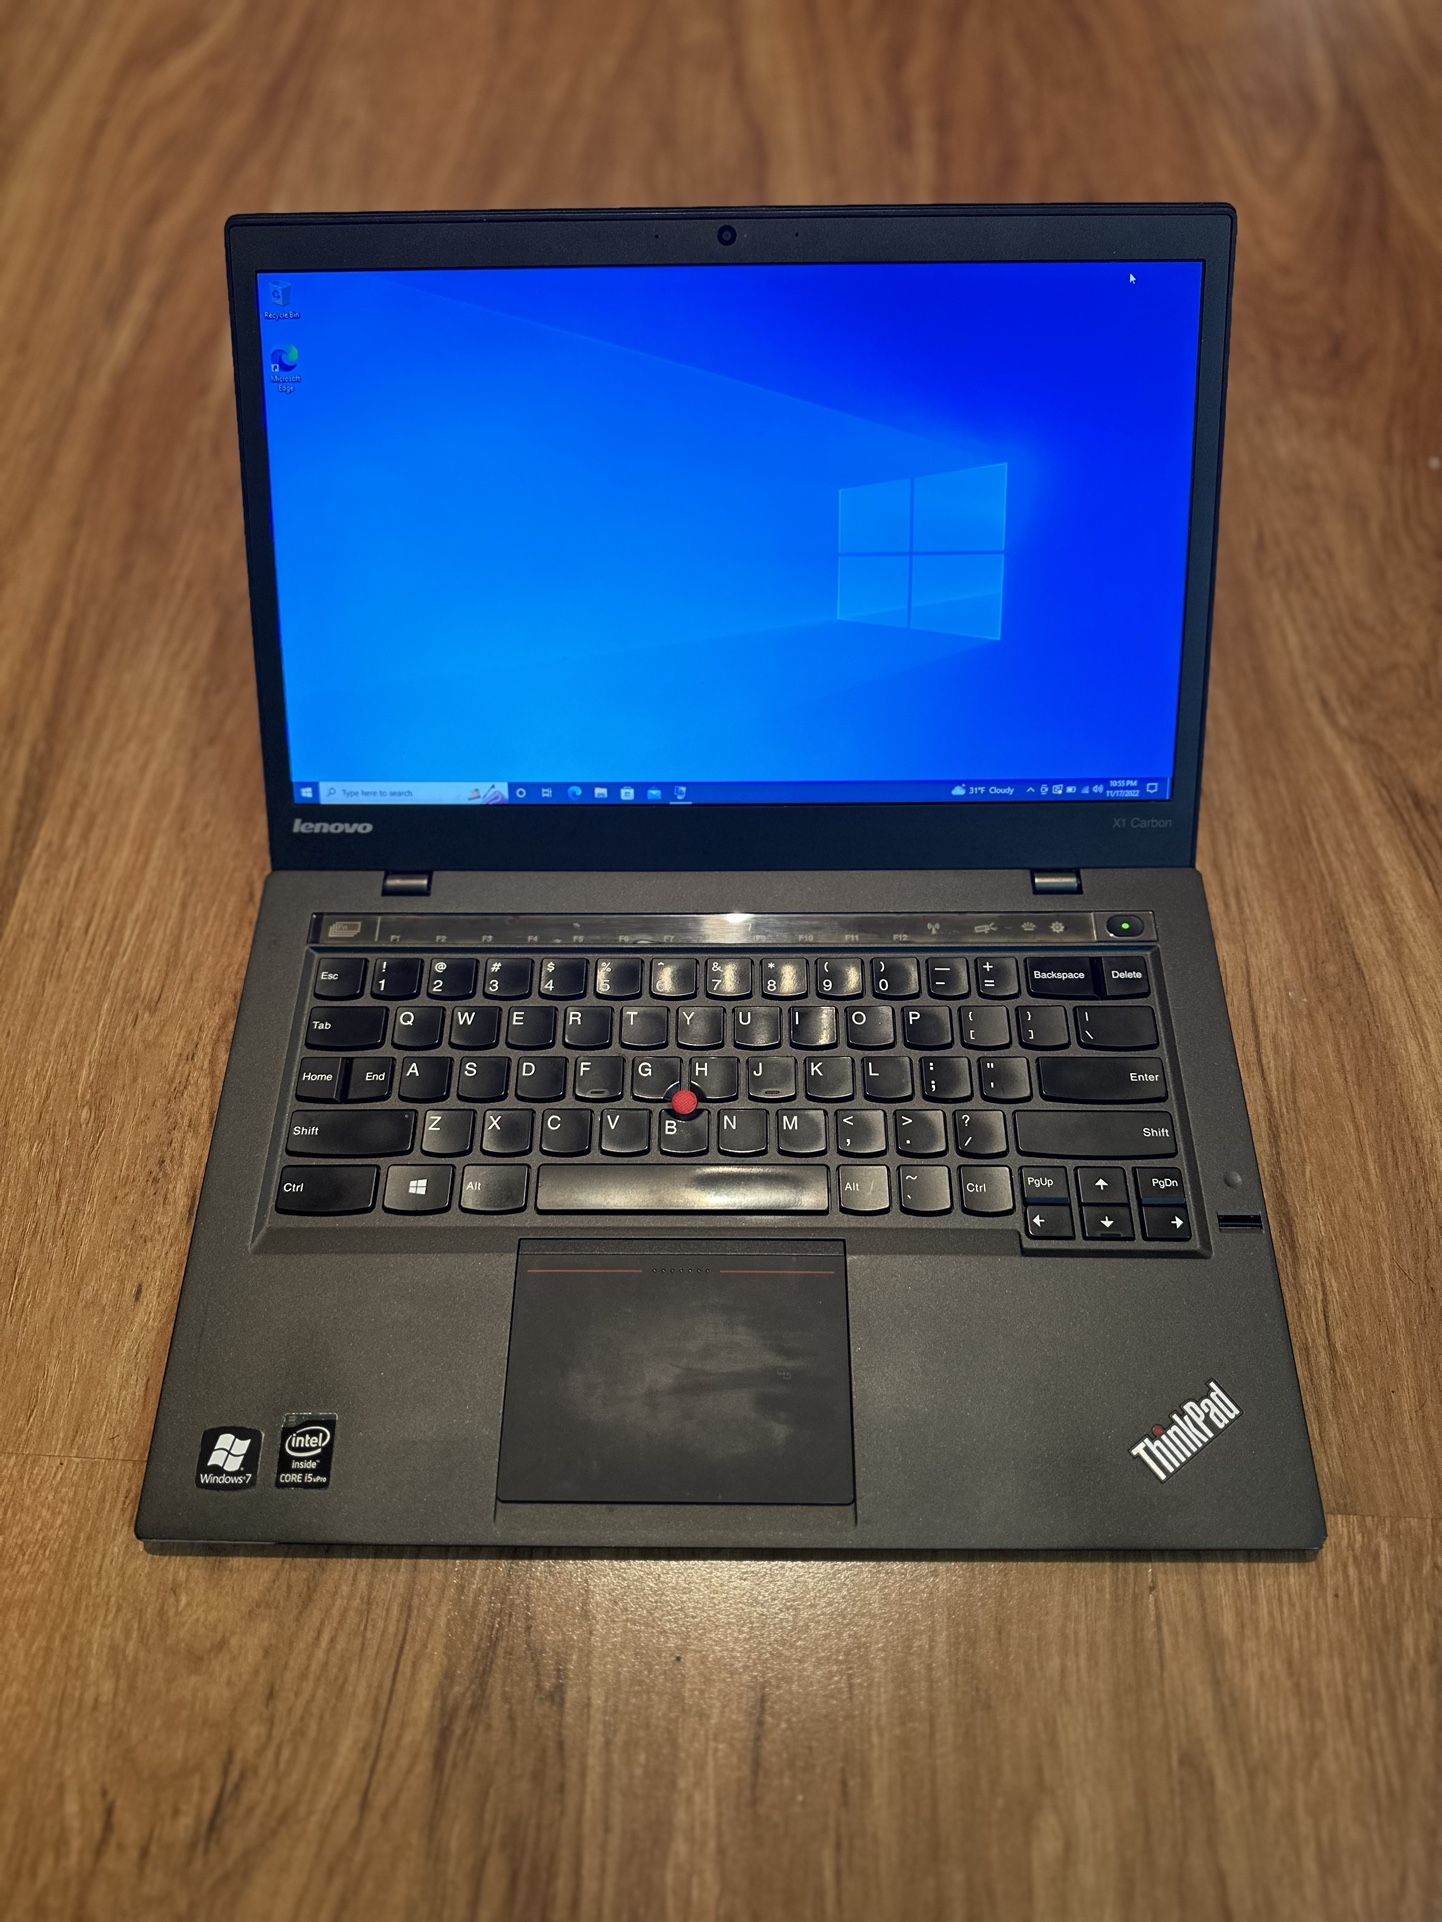 Lenovo ThinkPad X1 Carbon core i5 4th gen 8GB RAM 256GB SSD Hard Drive Windows 10 Pro 15” Light Weight Laptop with charger in Excellent Working condit